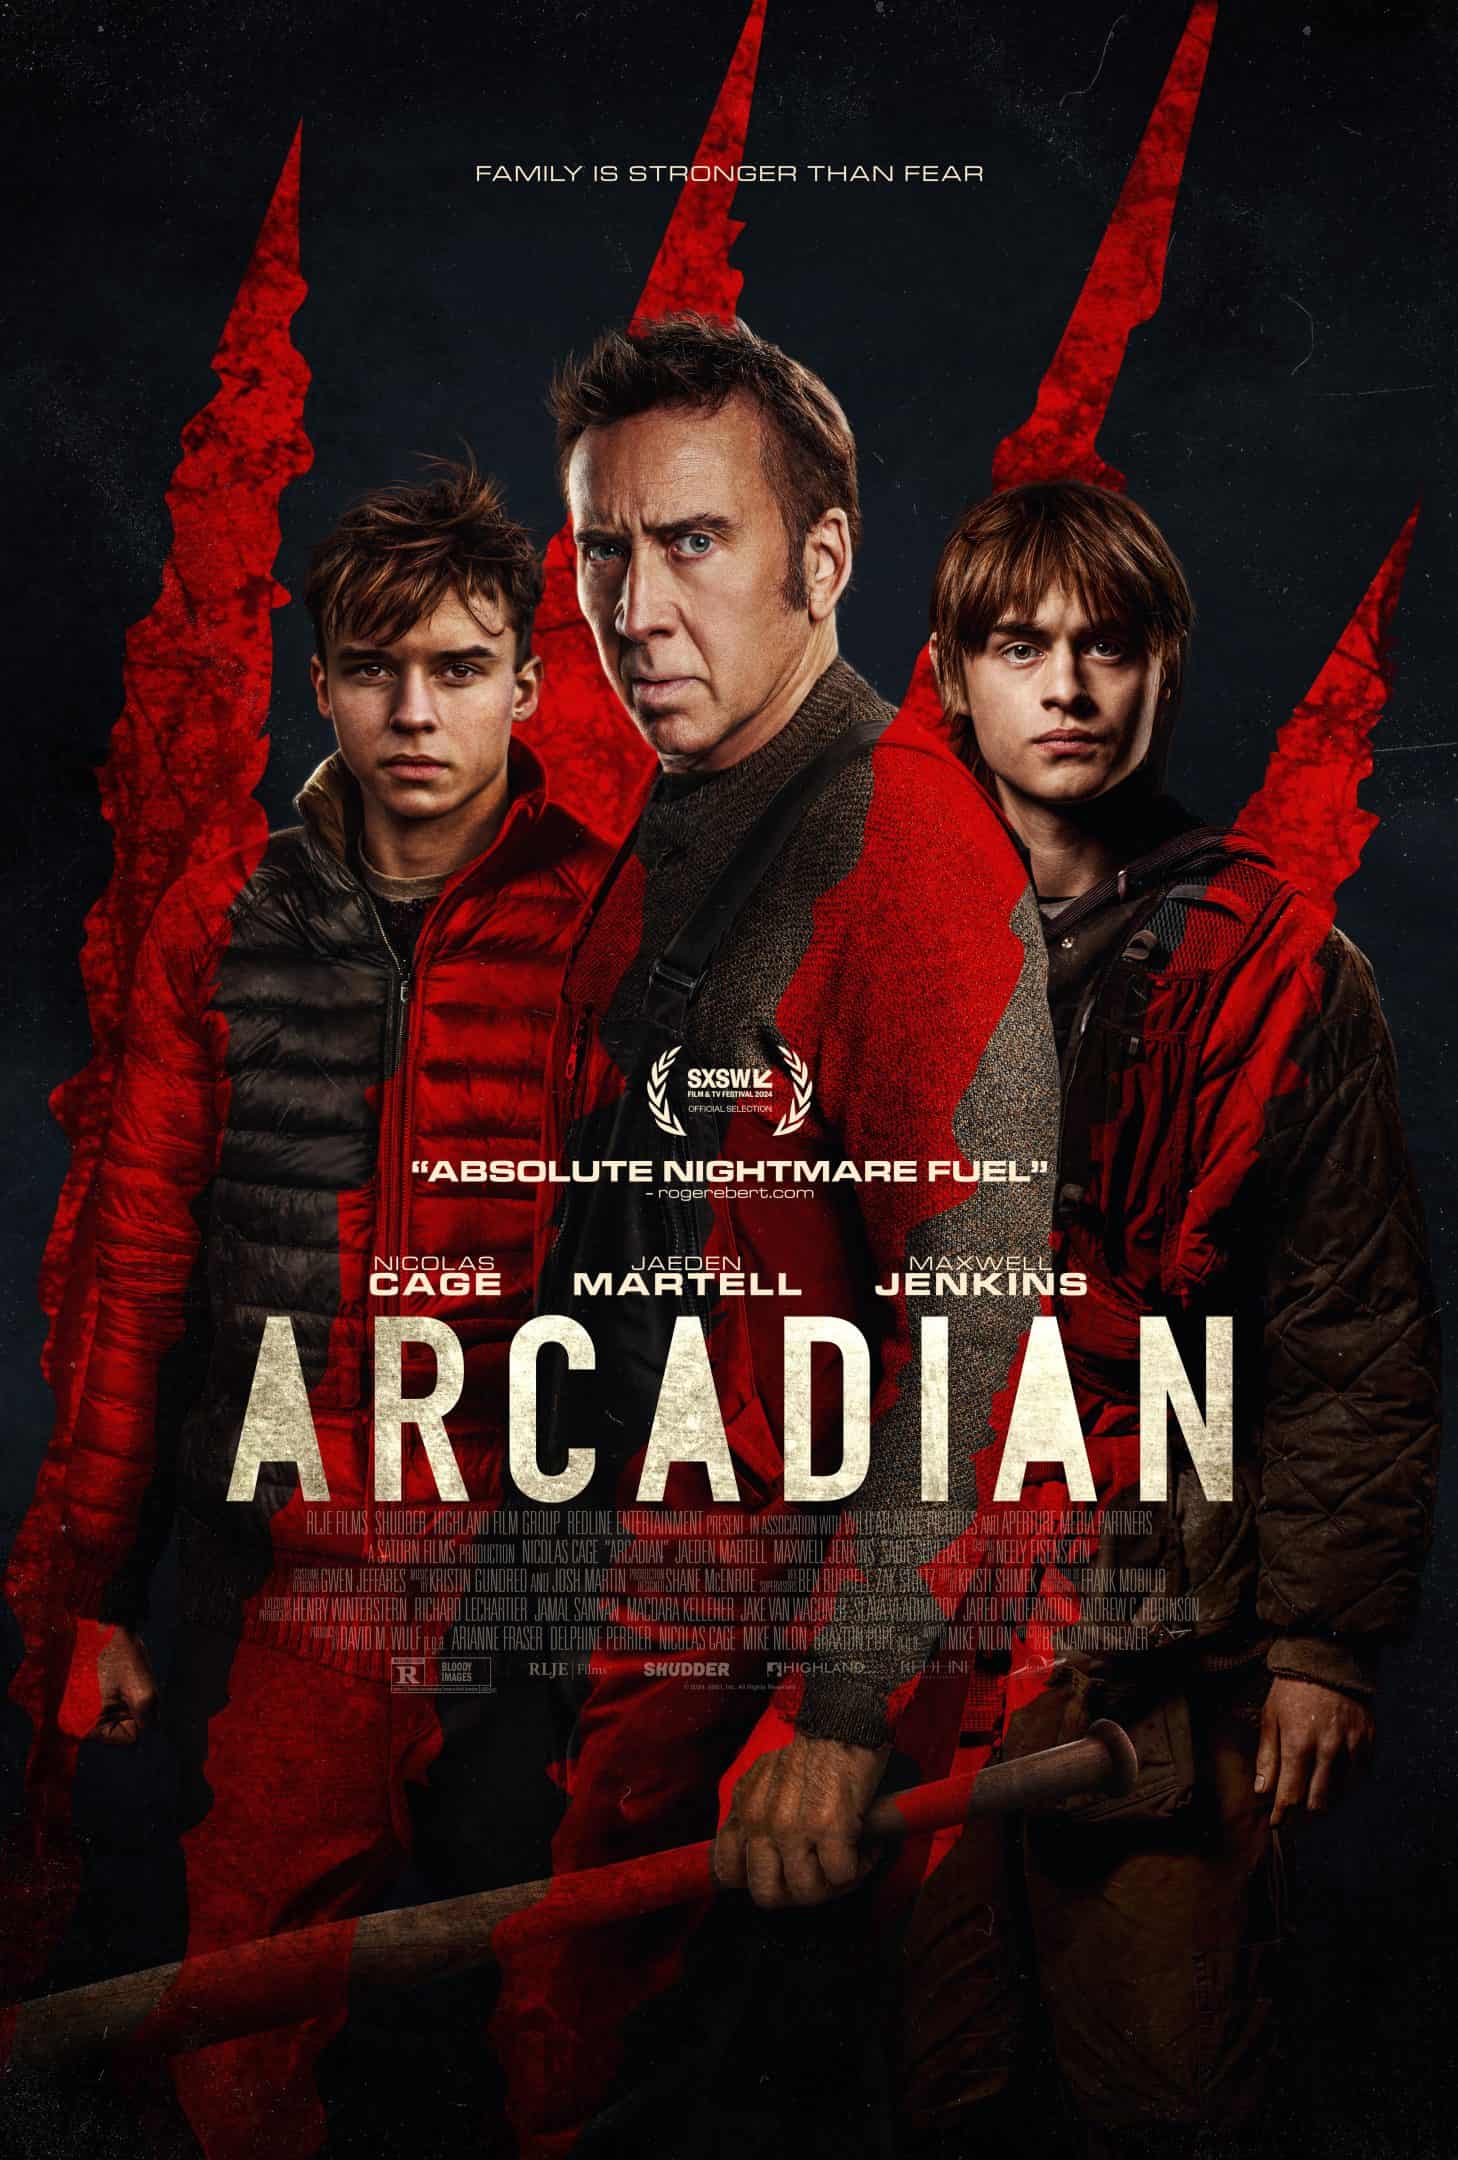 Arcadian gets a new poster for its Dystopian debut! 5